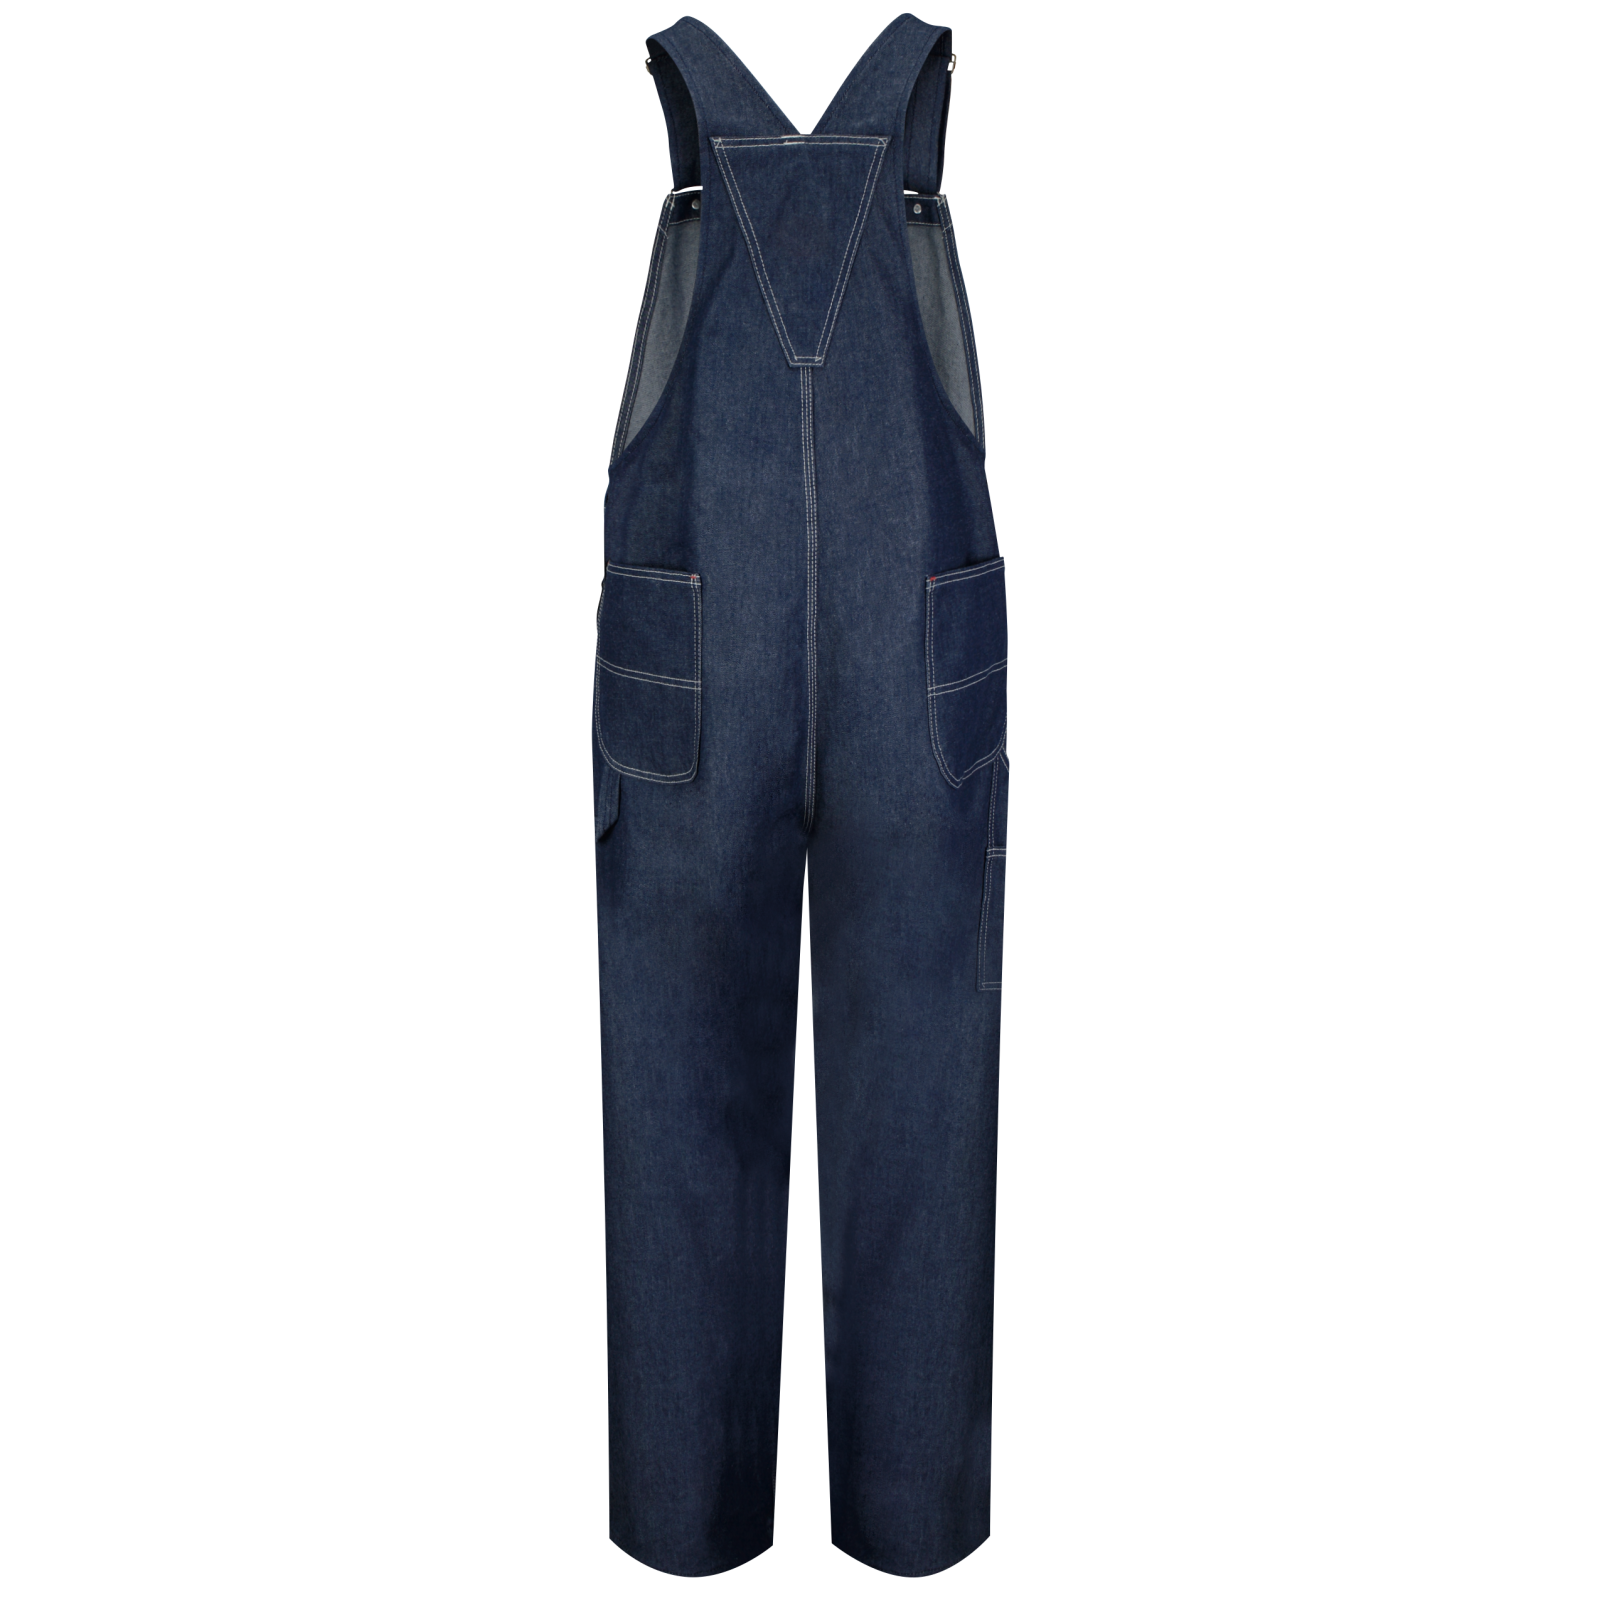 Cheap Mens Pocket Jeans Overall Jumpsuit Streetwear Overall Suspender Pants  | Joom